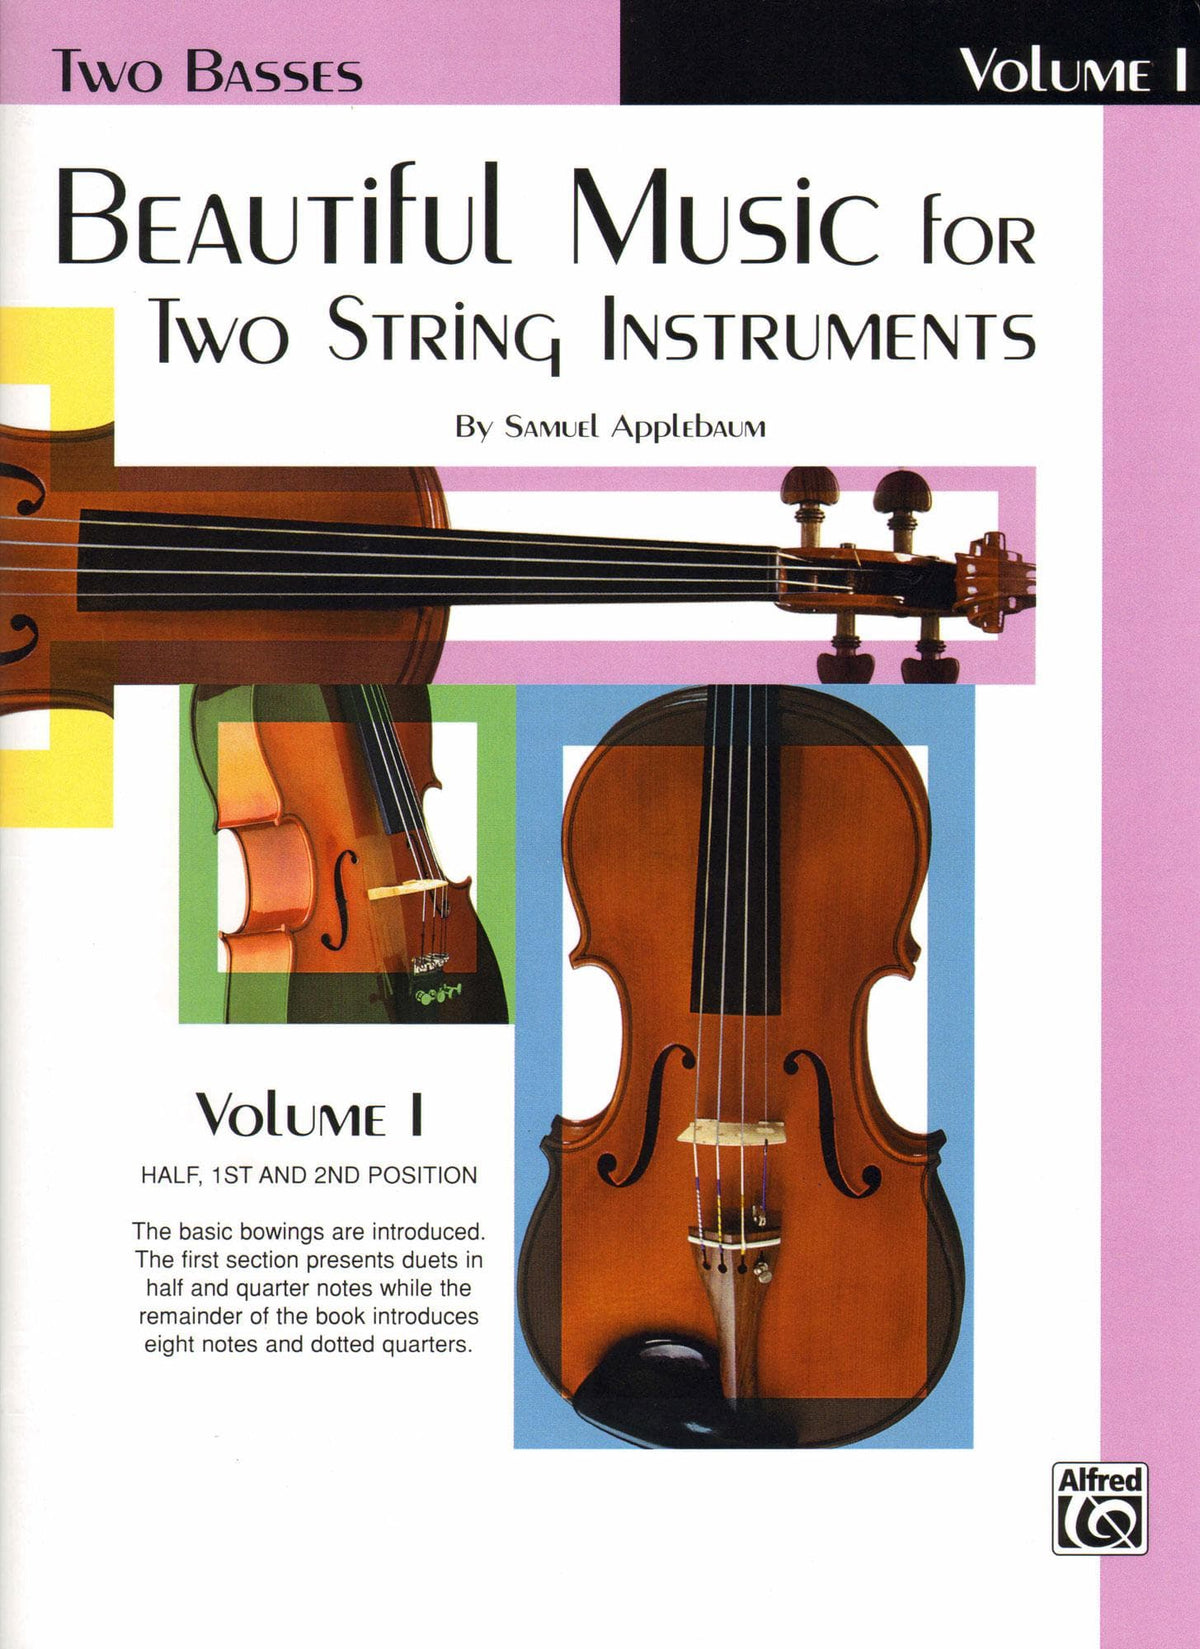 Applebaum, Samuel - Beautiful Music For Two String Instruments - Volume 1 for Double Bass - Belwin/Mills Publication